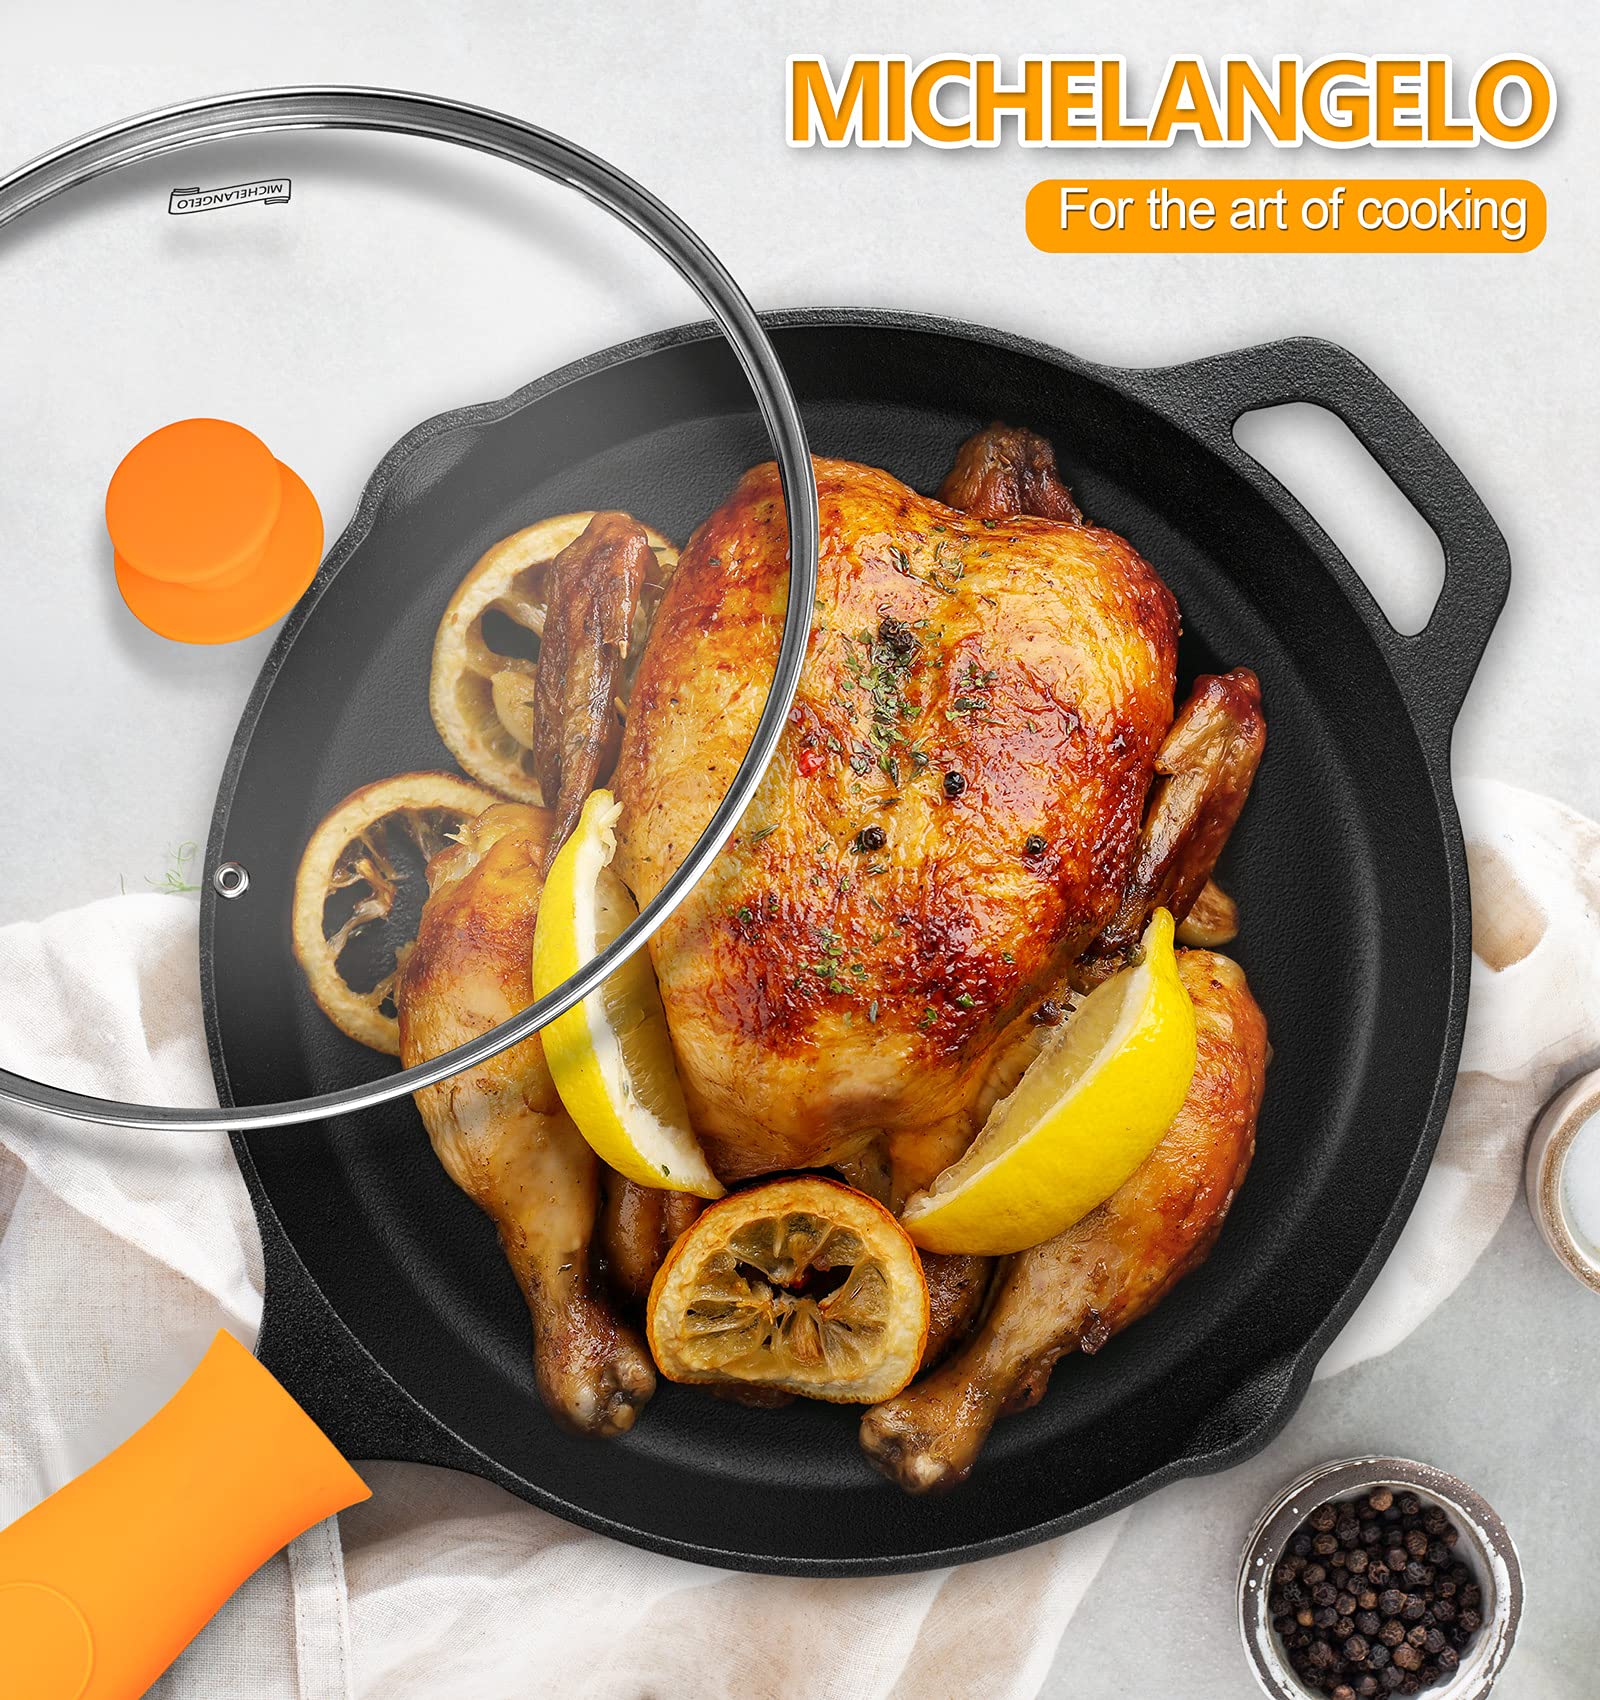 MICHELANGELO Cast Iron Skillet, 12 Inch Cast Iron Skillet With Lid, Preseasoned Large Skillet Oven Safe, Iron Skillets for Cooking with Silicone Handle & Scrapers - 12 Inch